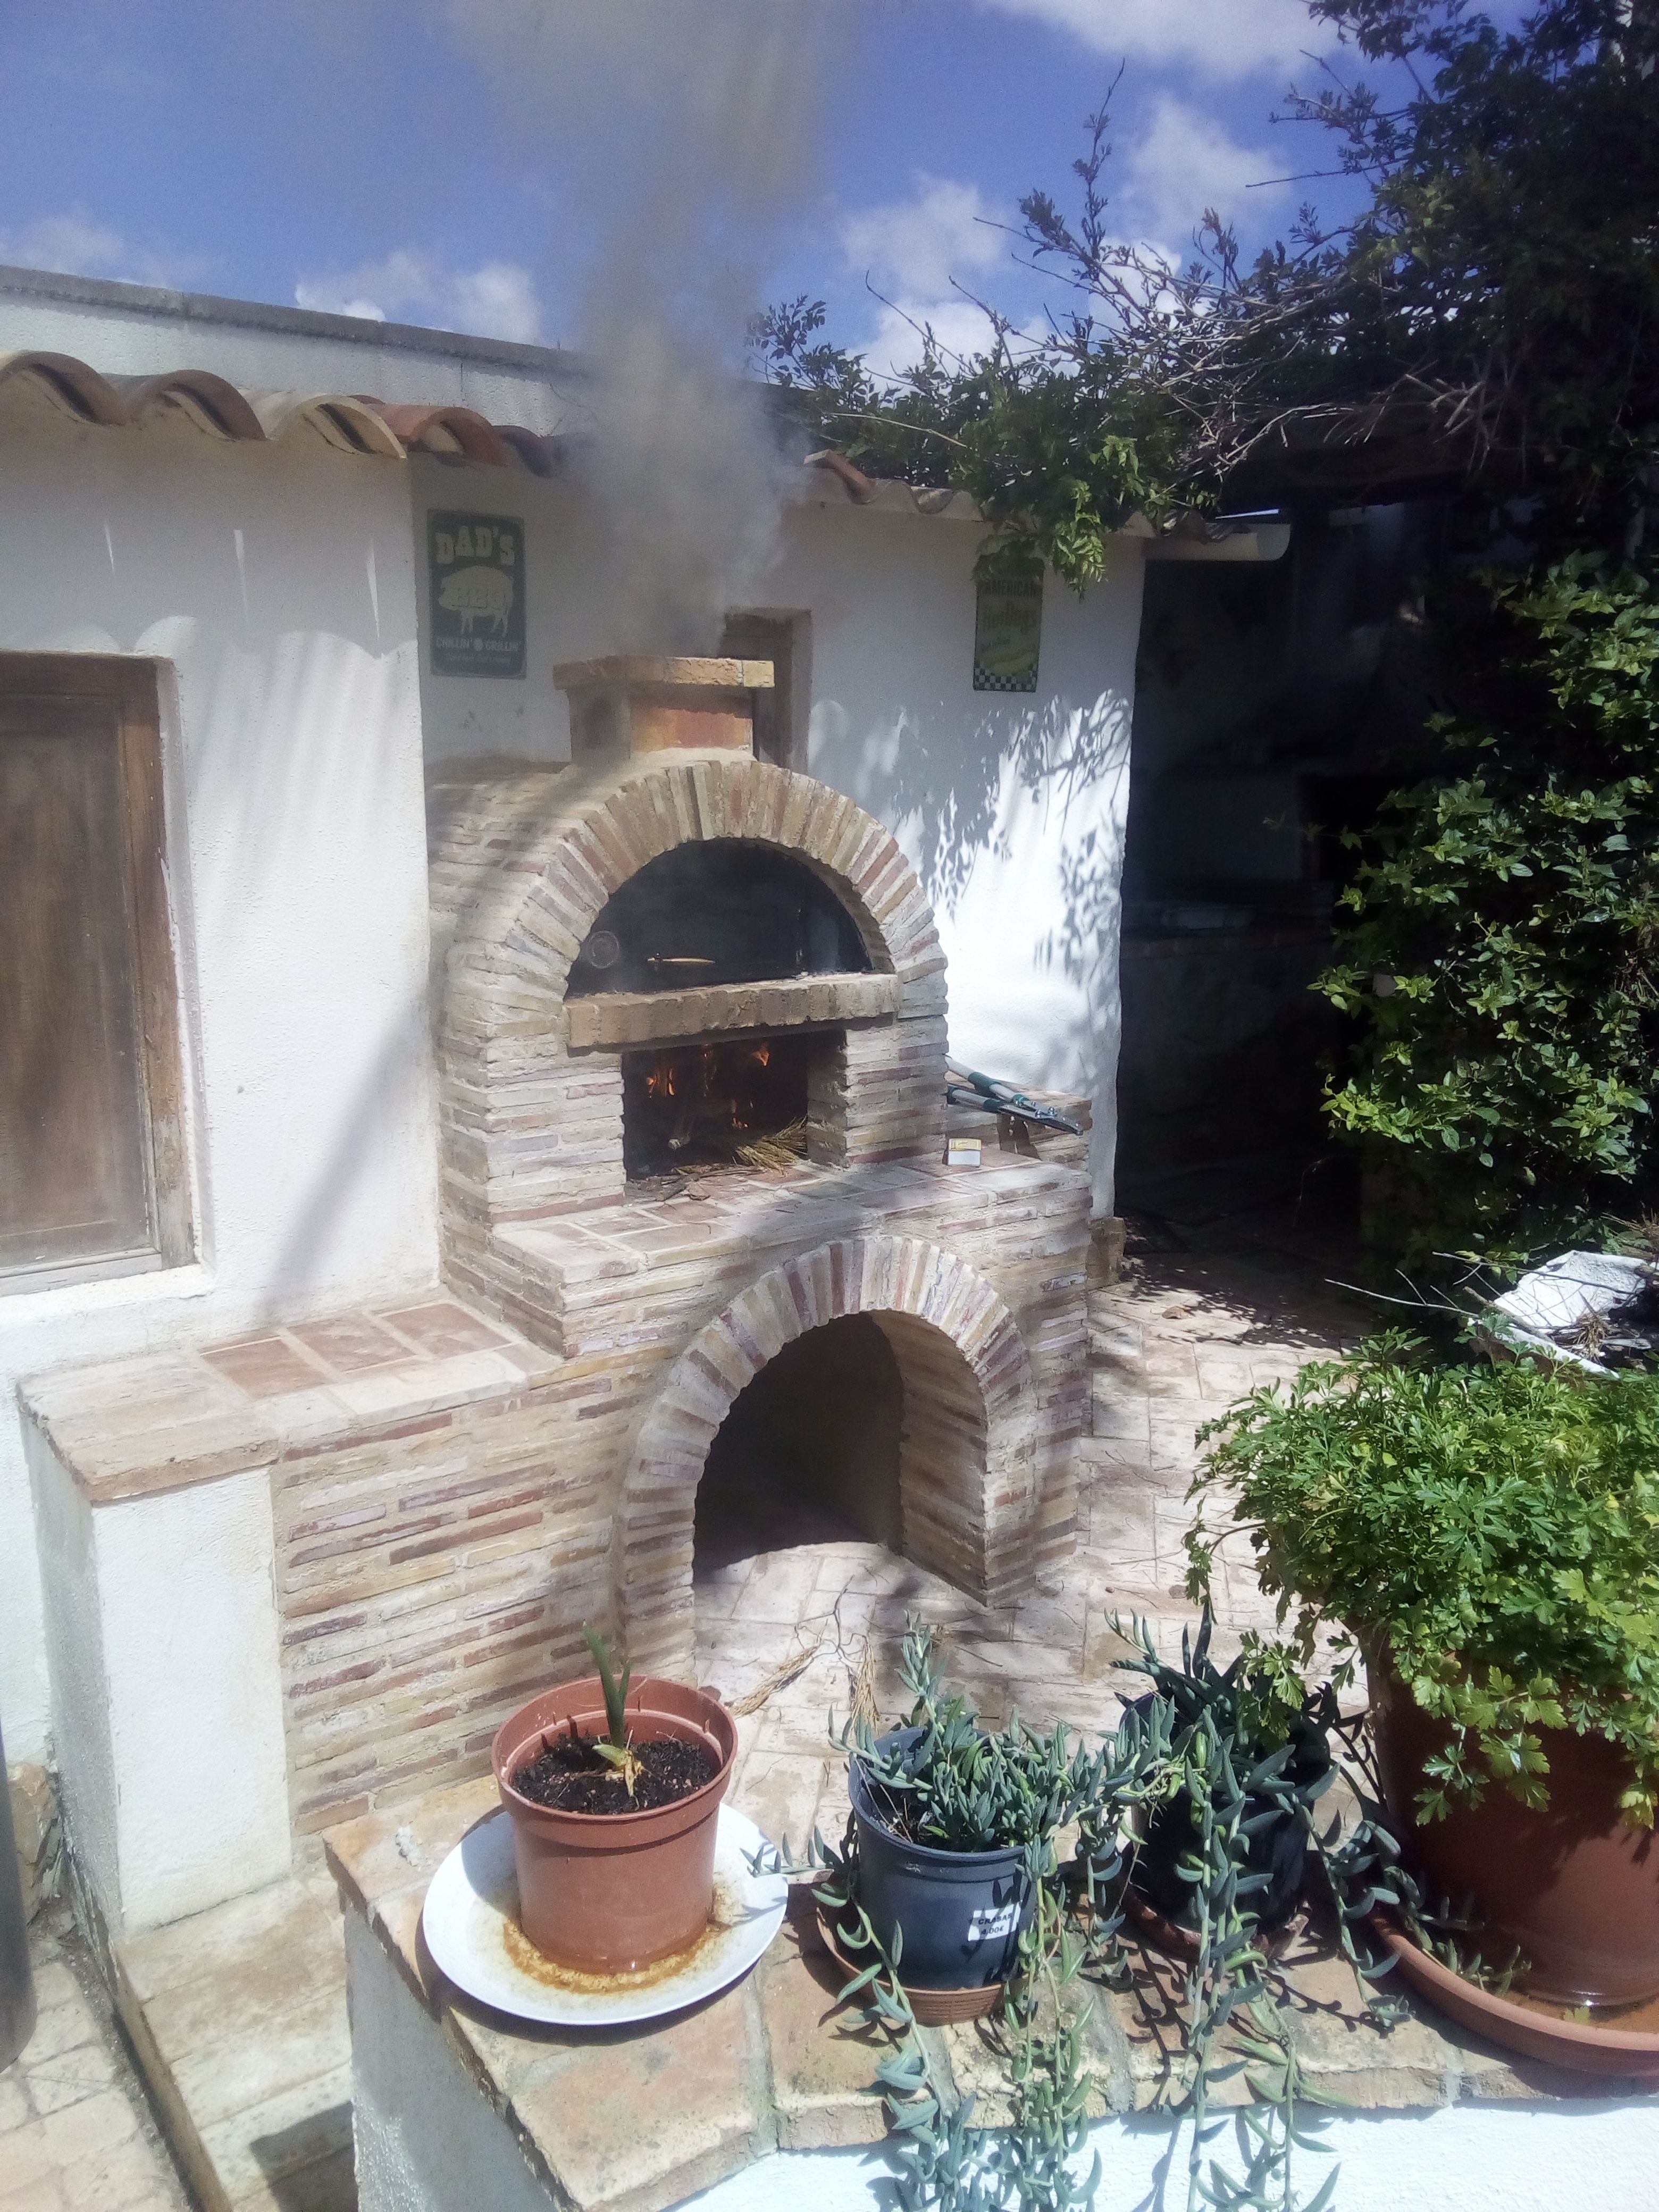 Getting Your Very Own Personal Stone Pizza Oven